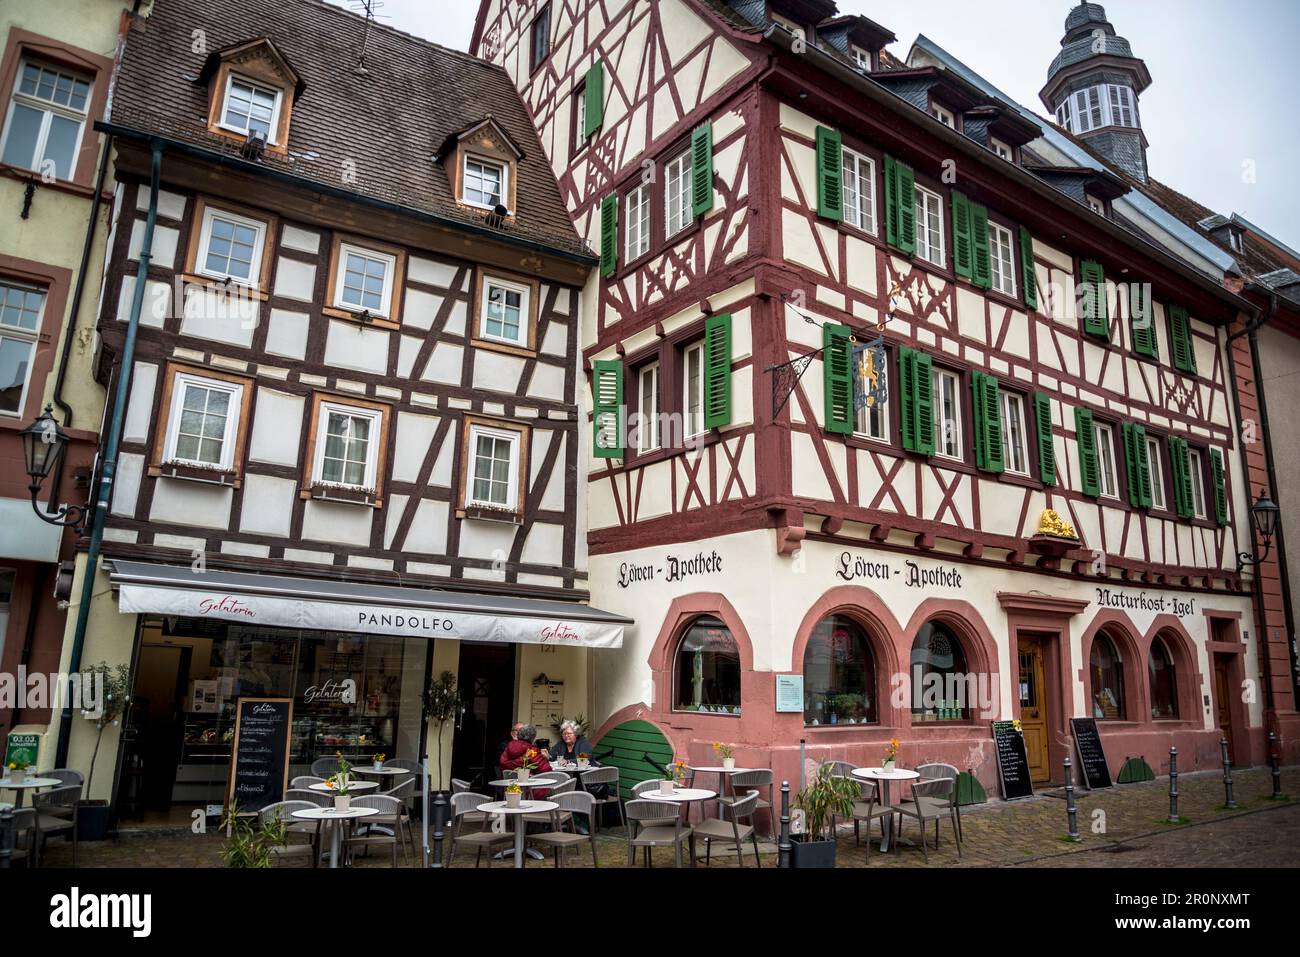 The Market Square with restaurants and old traditional medieval architecture with exposed beams, Weinheim, Baden-Württemberg, Germany Stock Photo